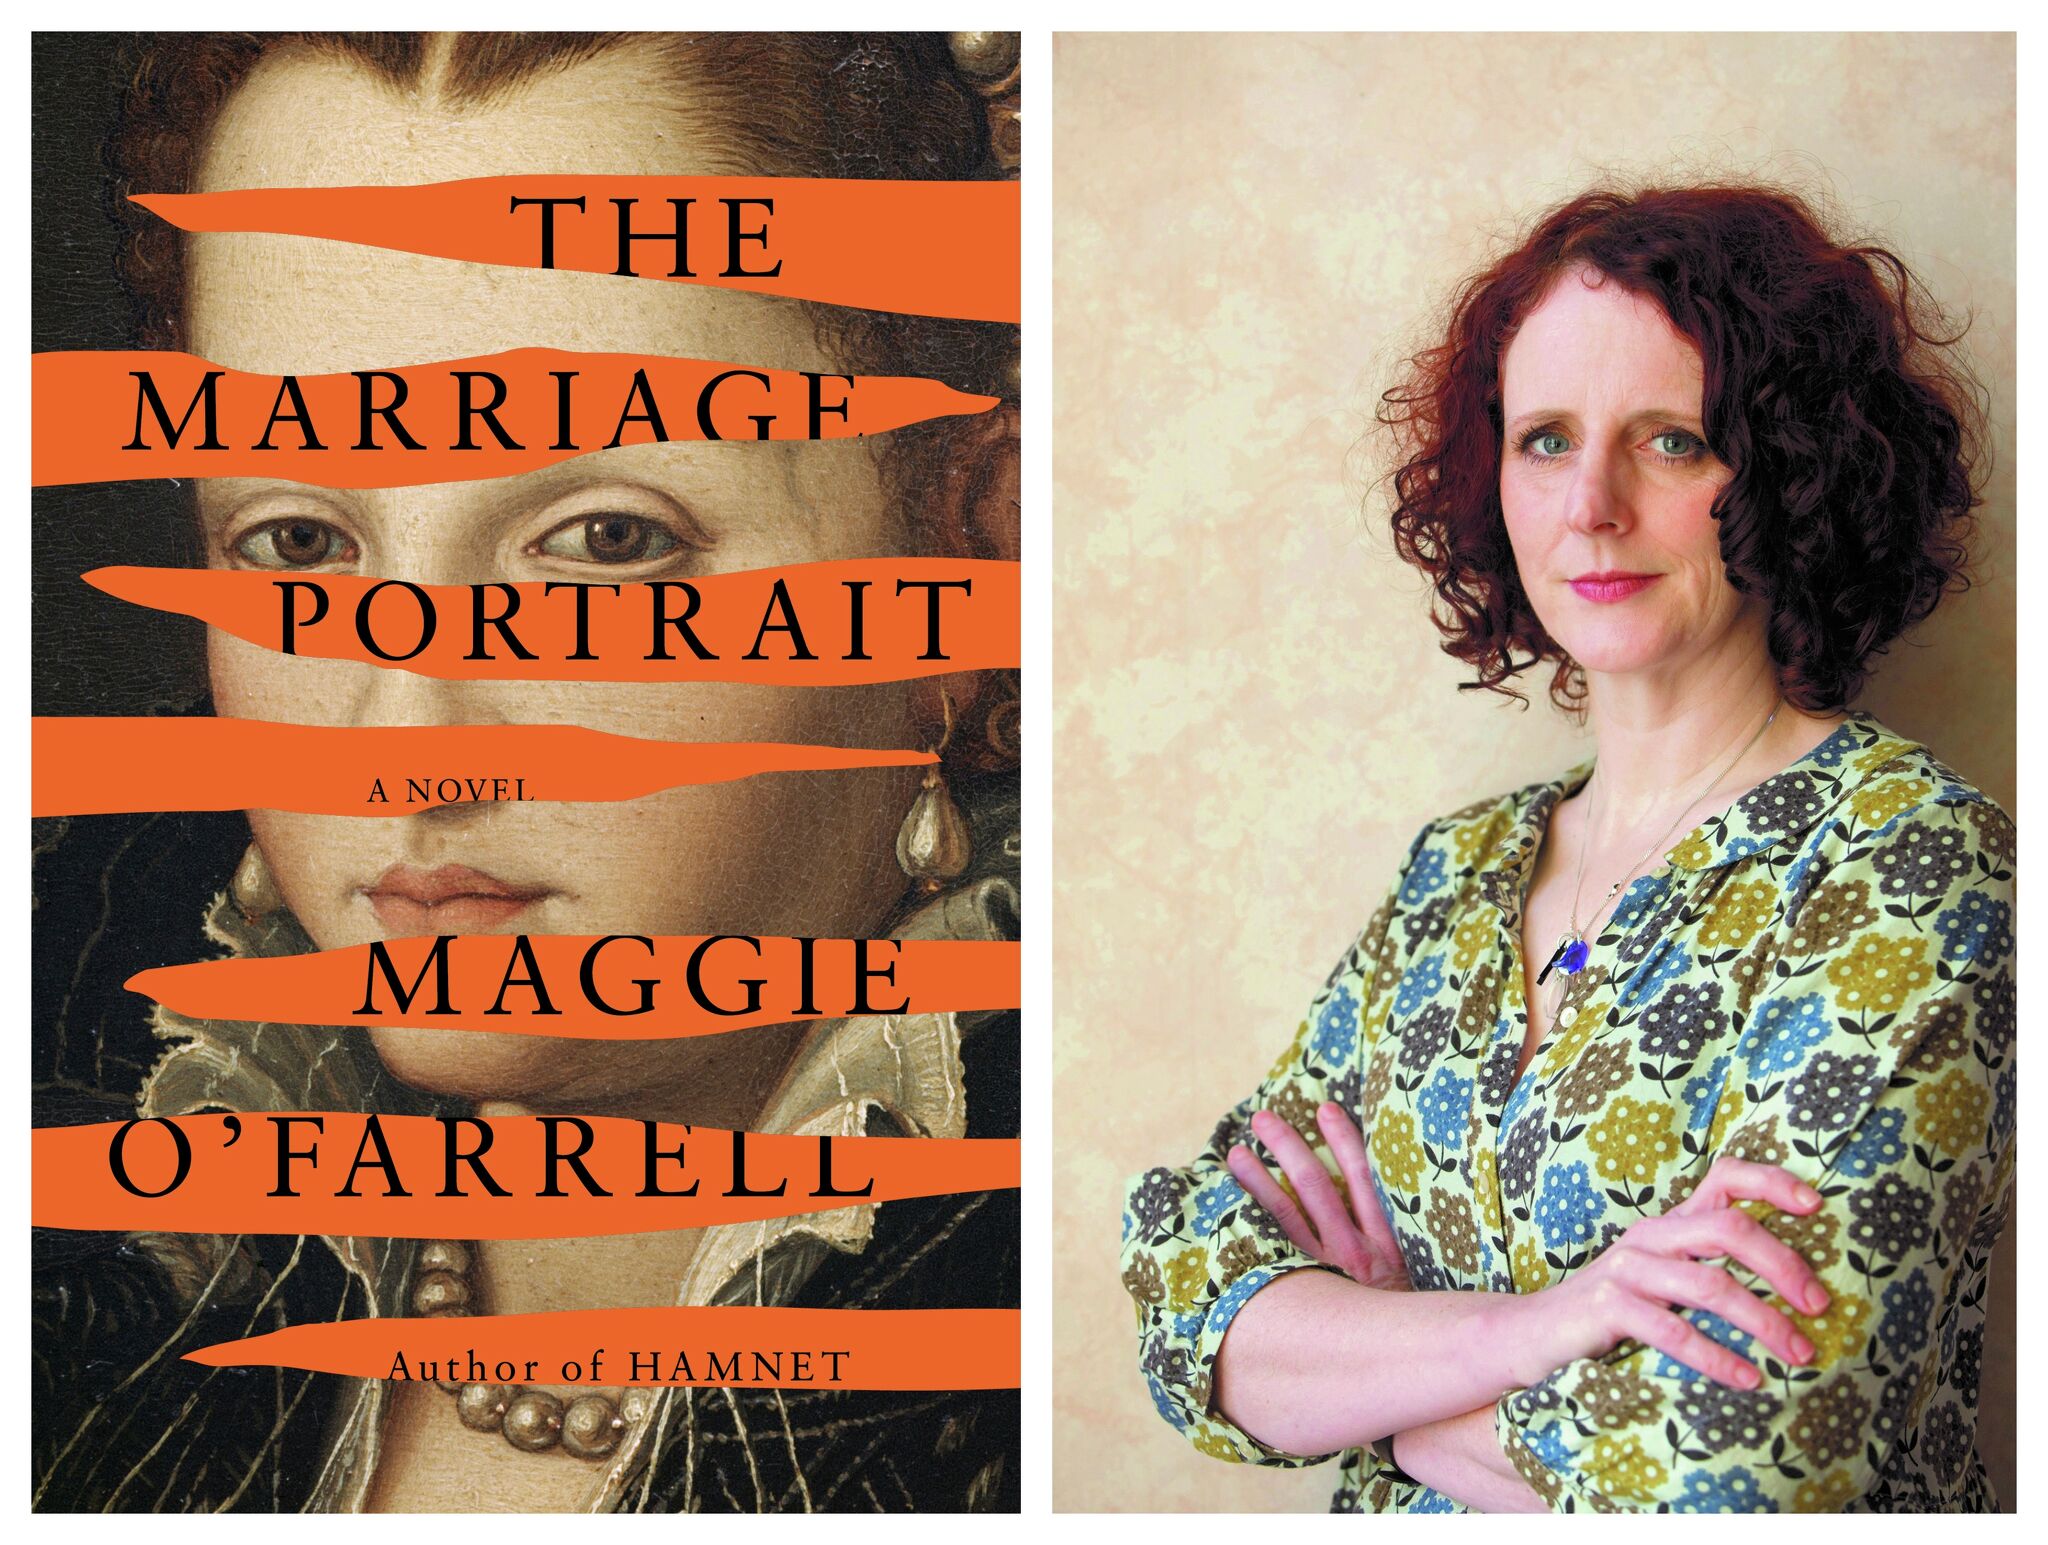 Maggie O'Farrell's 'The Marriage Portrait' is a Renaissance page-turner.